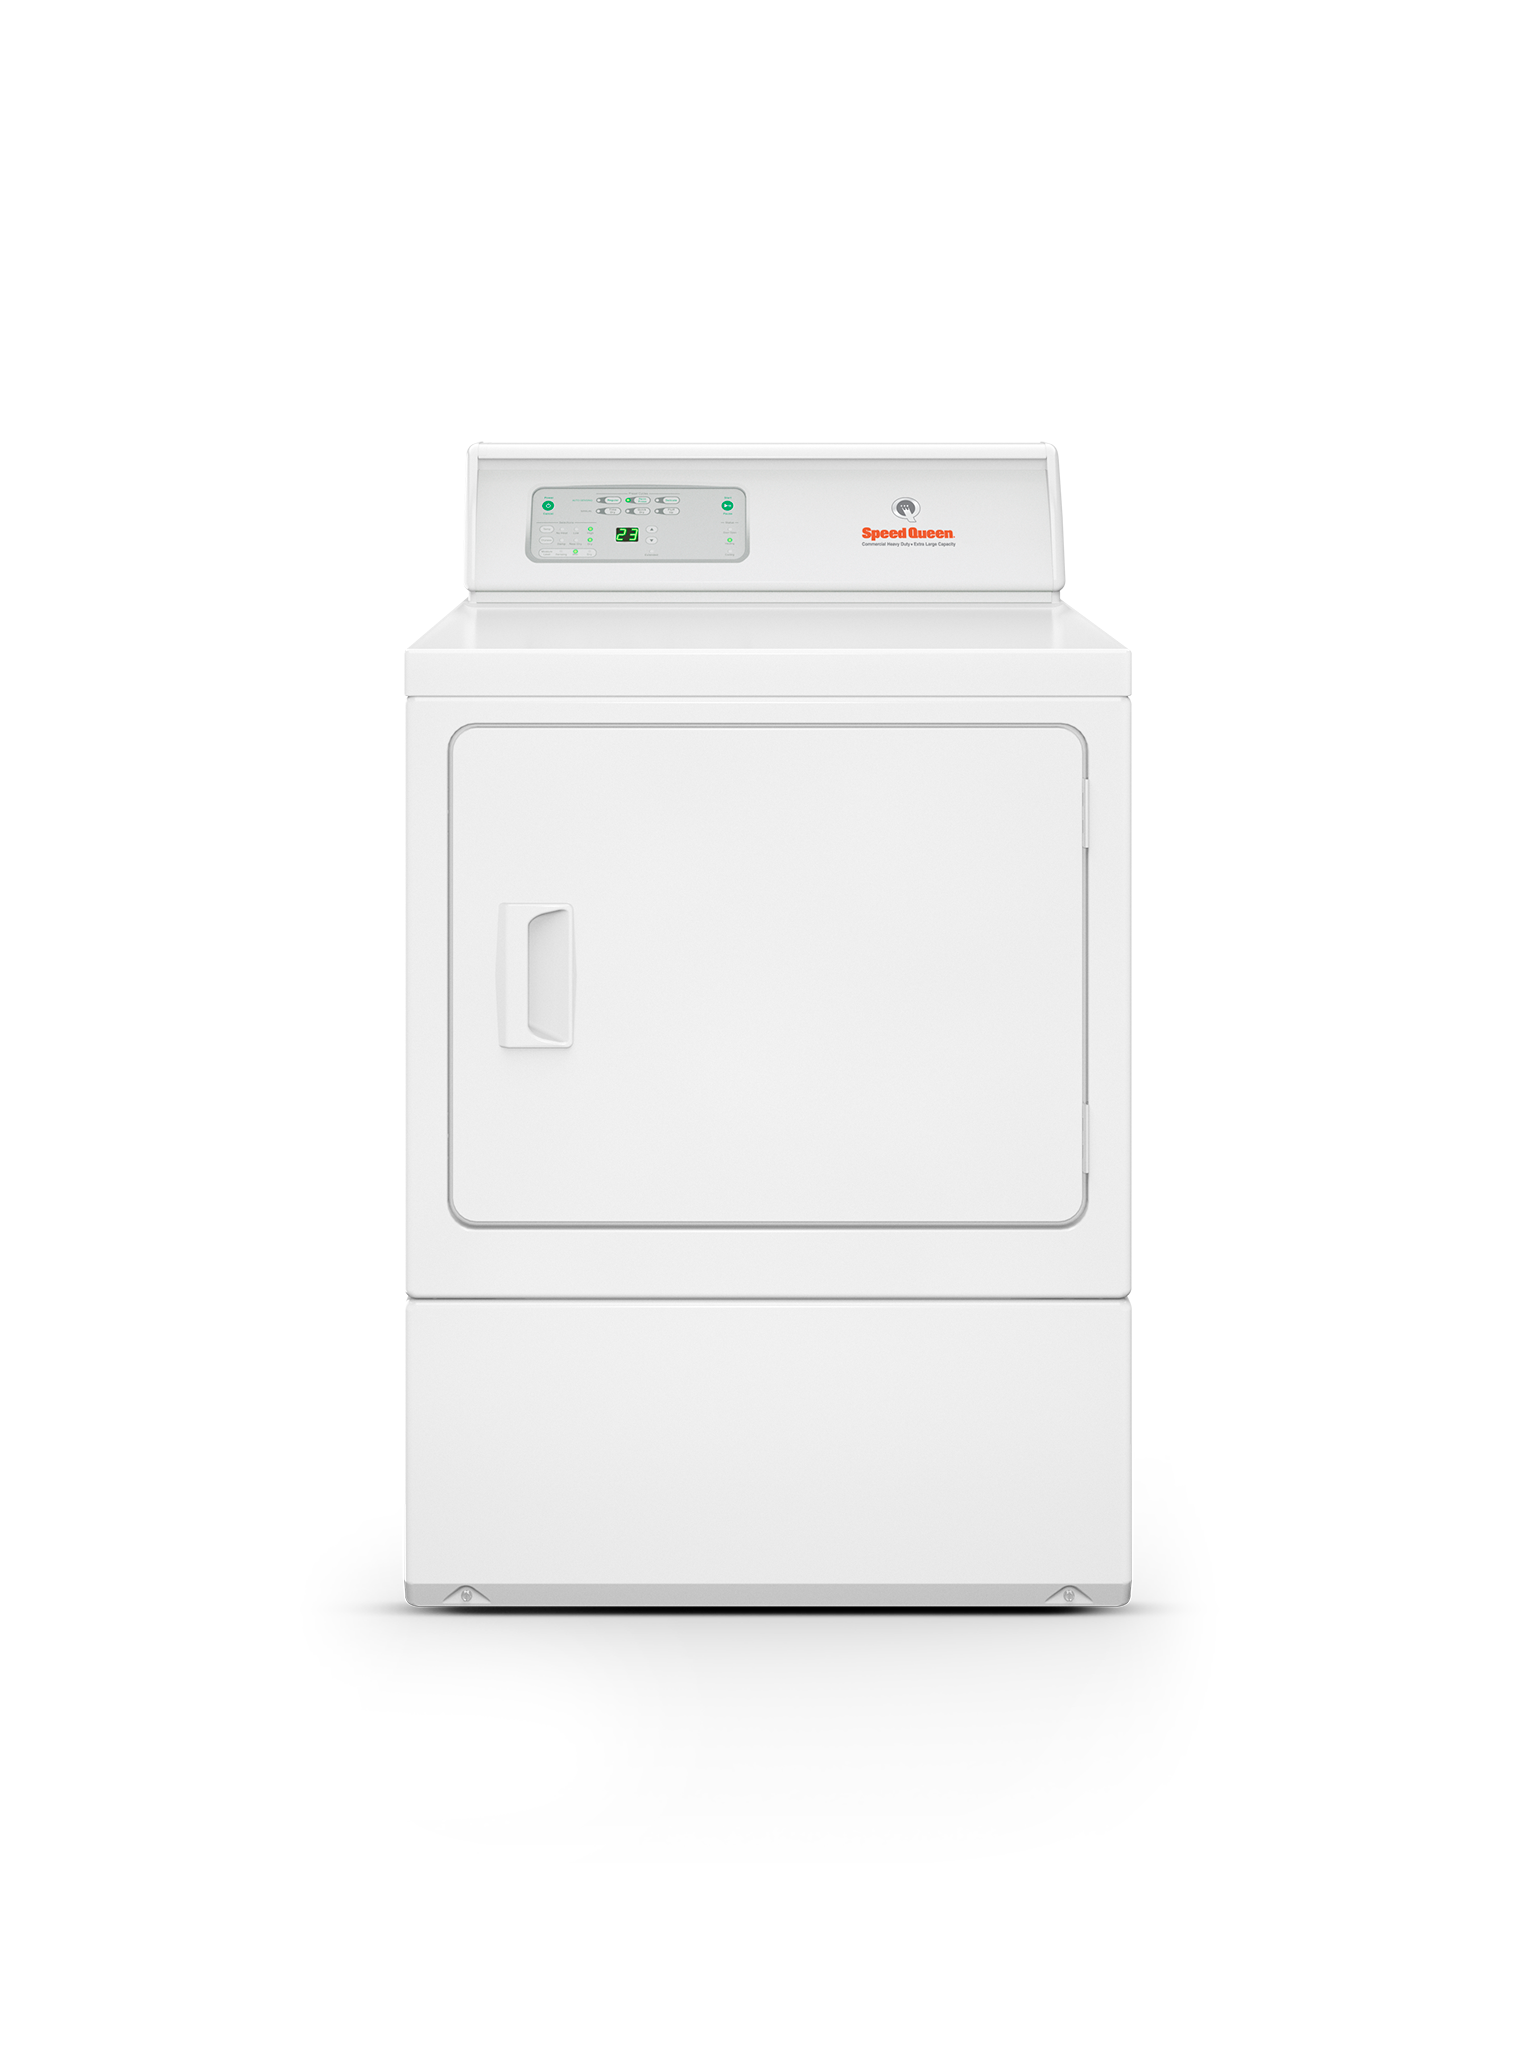 front view of dryer